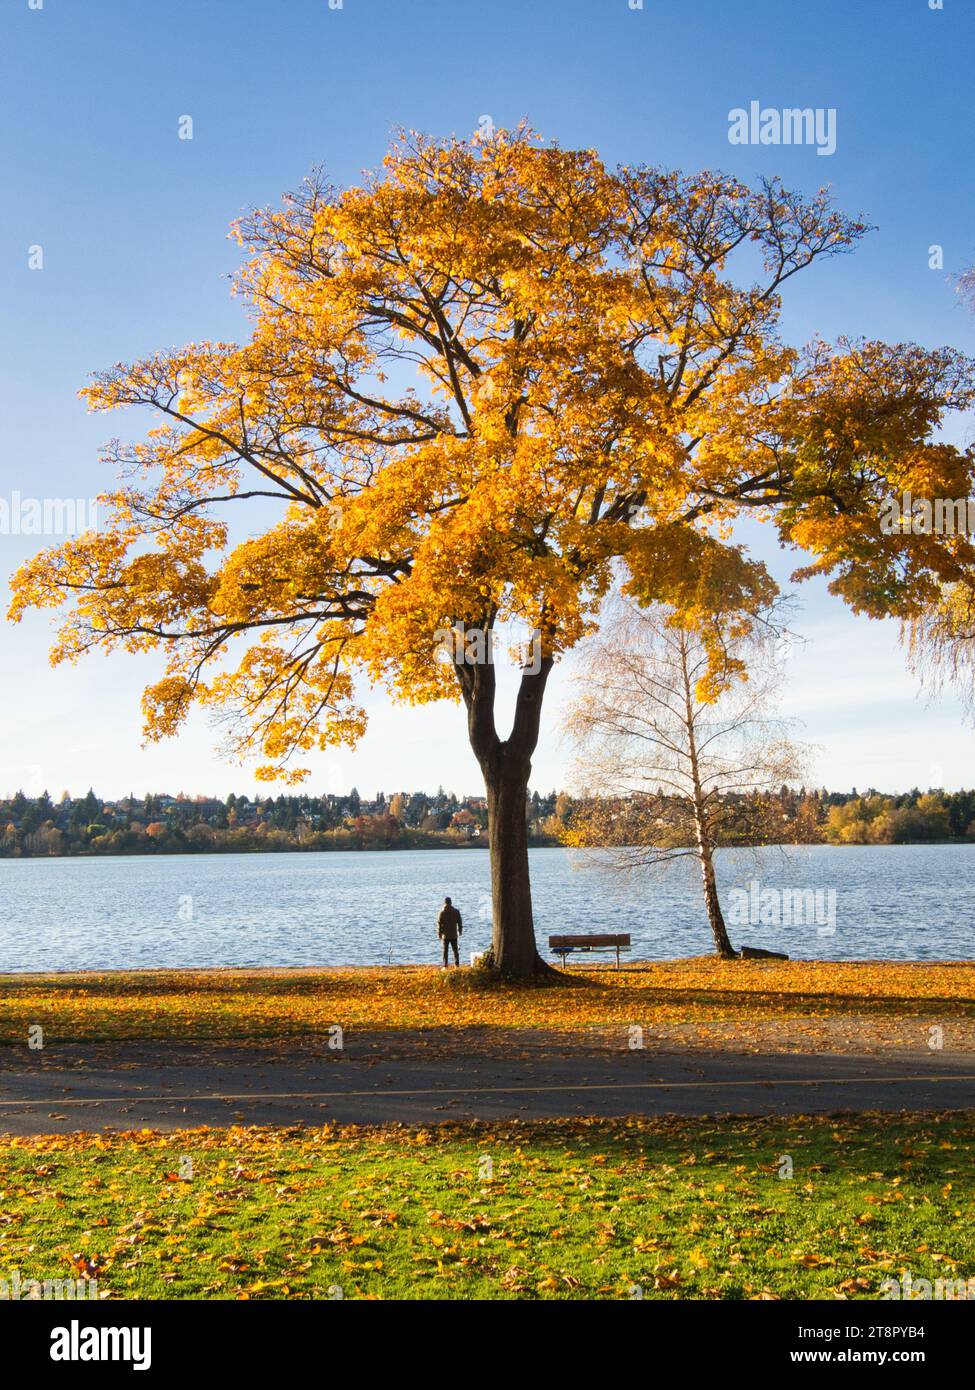 Man in distance stands in silhouette on shore of park lake under beautiful golden foliage tree in autumn with fishing pole on sunny fall day. Stock Photo